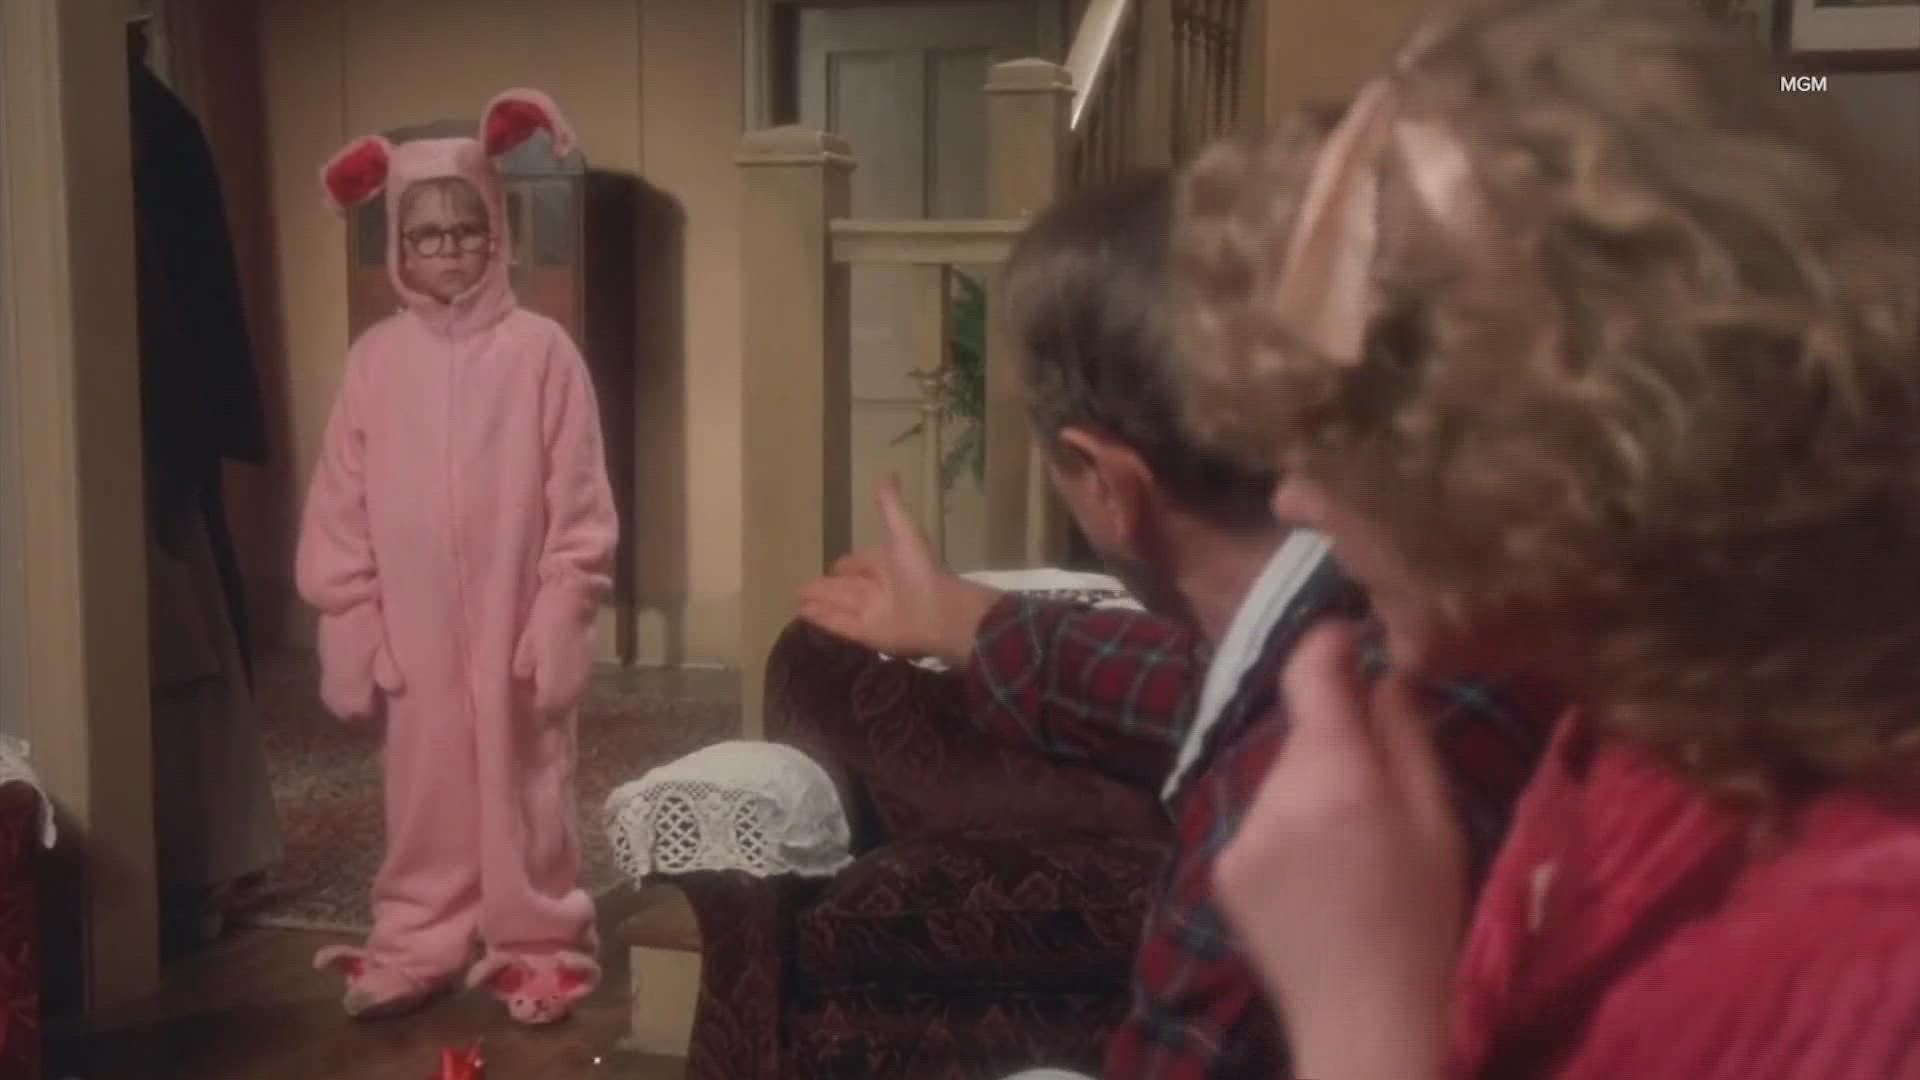 In the 1983 original movie, Peter Billingsley starred as young Ralphie -- a boy who desperately wants a Red Ryder BB rifle.